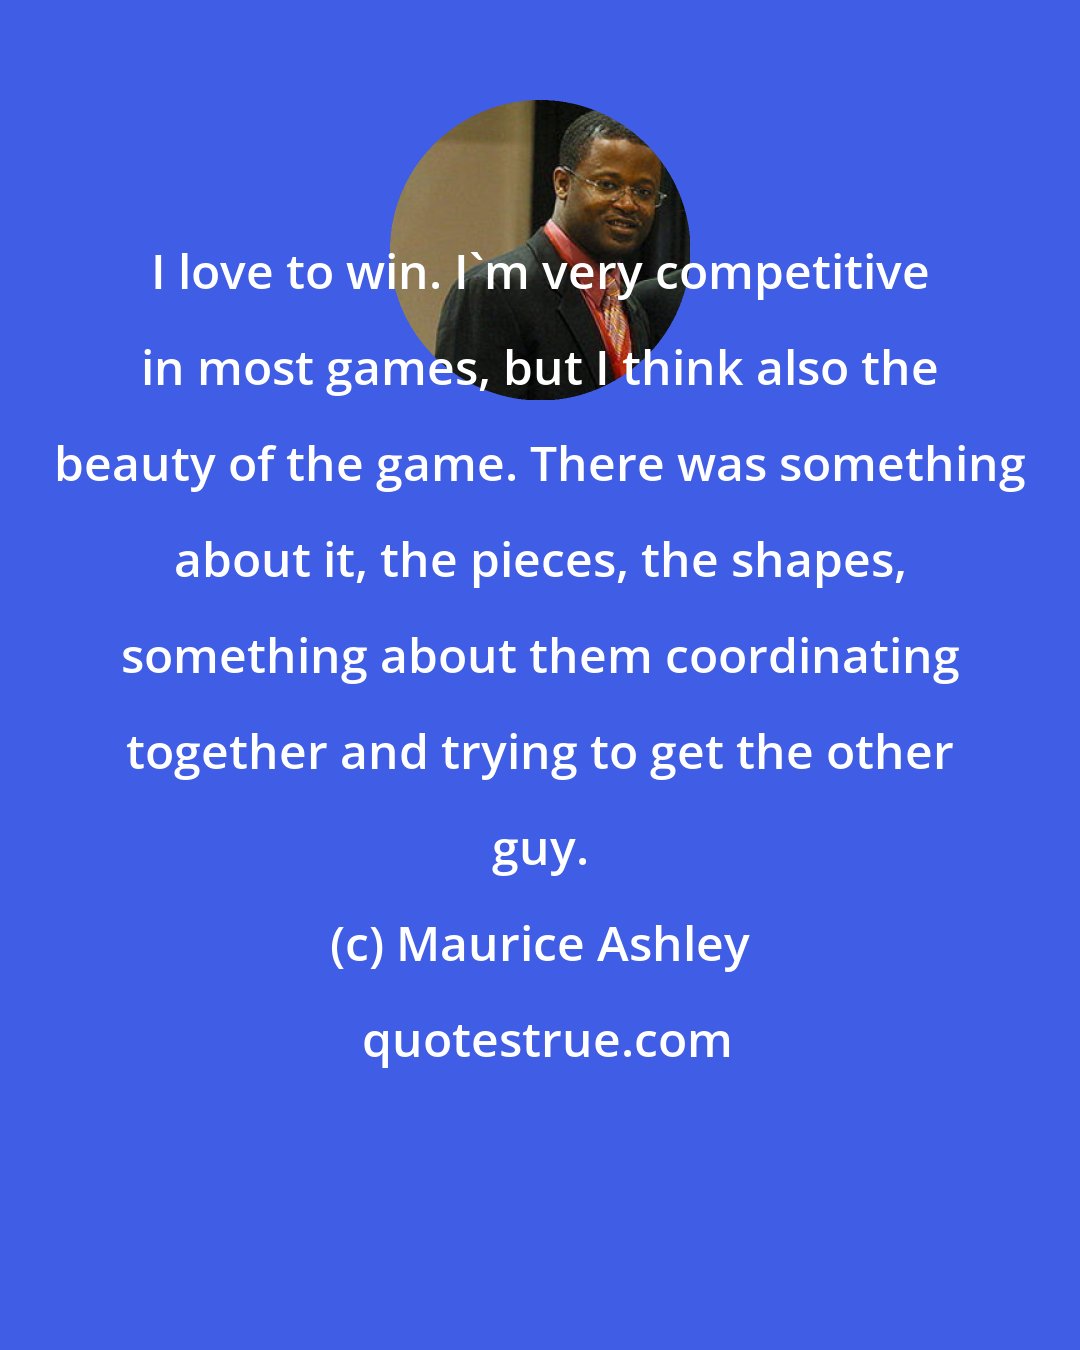 Maurice Ashley: I love to win. I'm very competitive in most games, but I think also the beauty of the game. There was something about it, the pieces, the shapes, something about them coordinating together and trying to get the other guy.